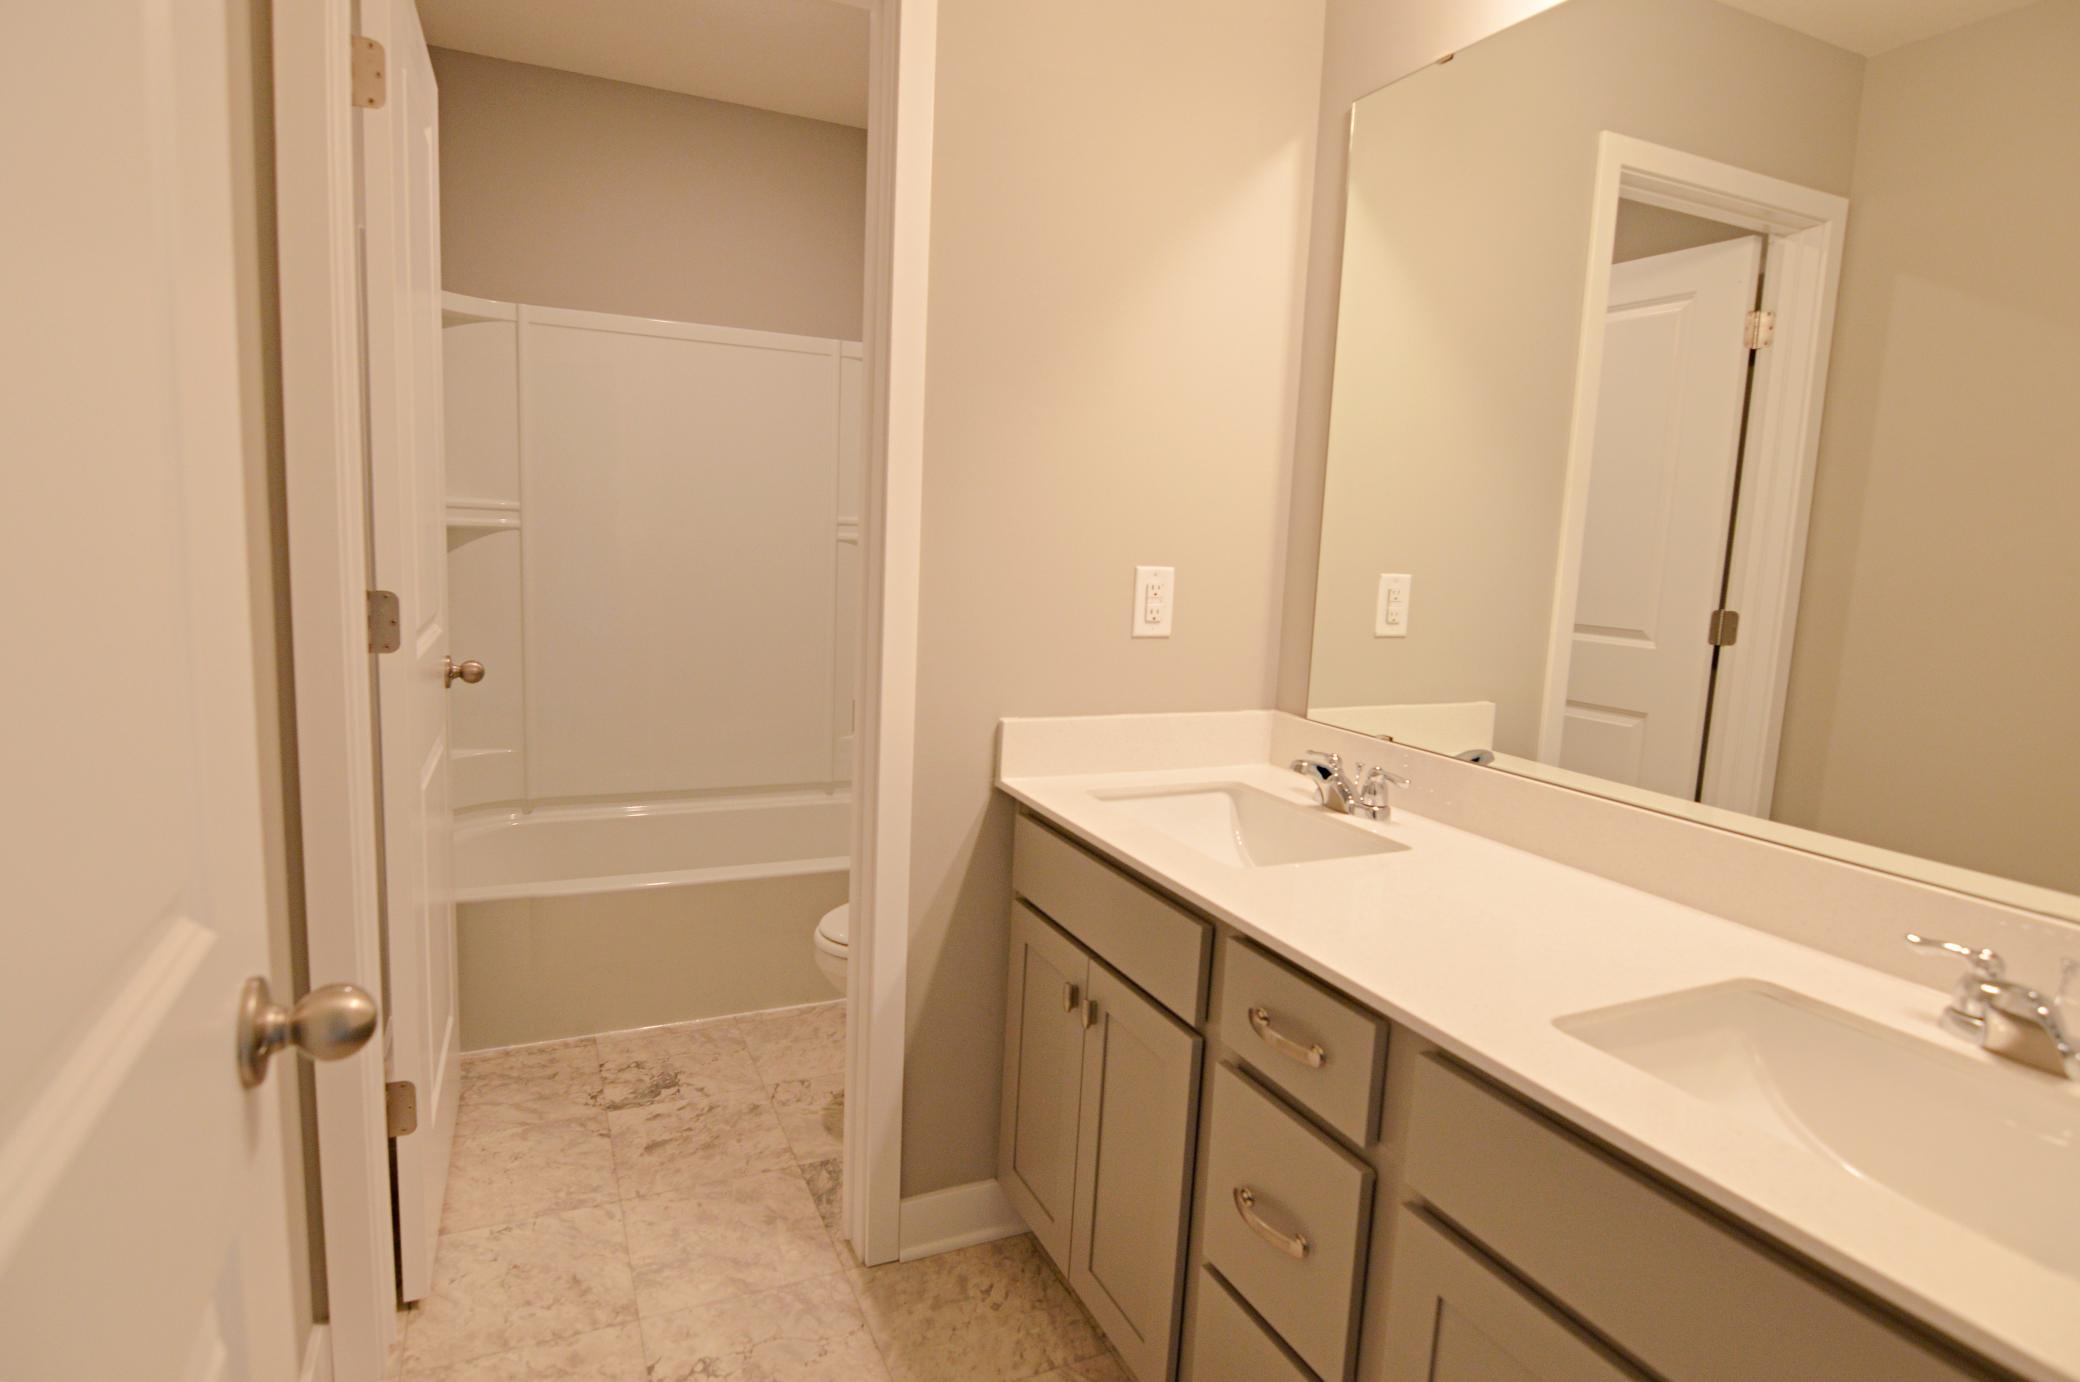 The home's actual secondary bathroom features a double vanity, and private stool/tub area!